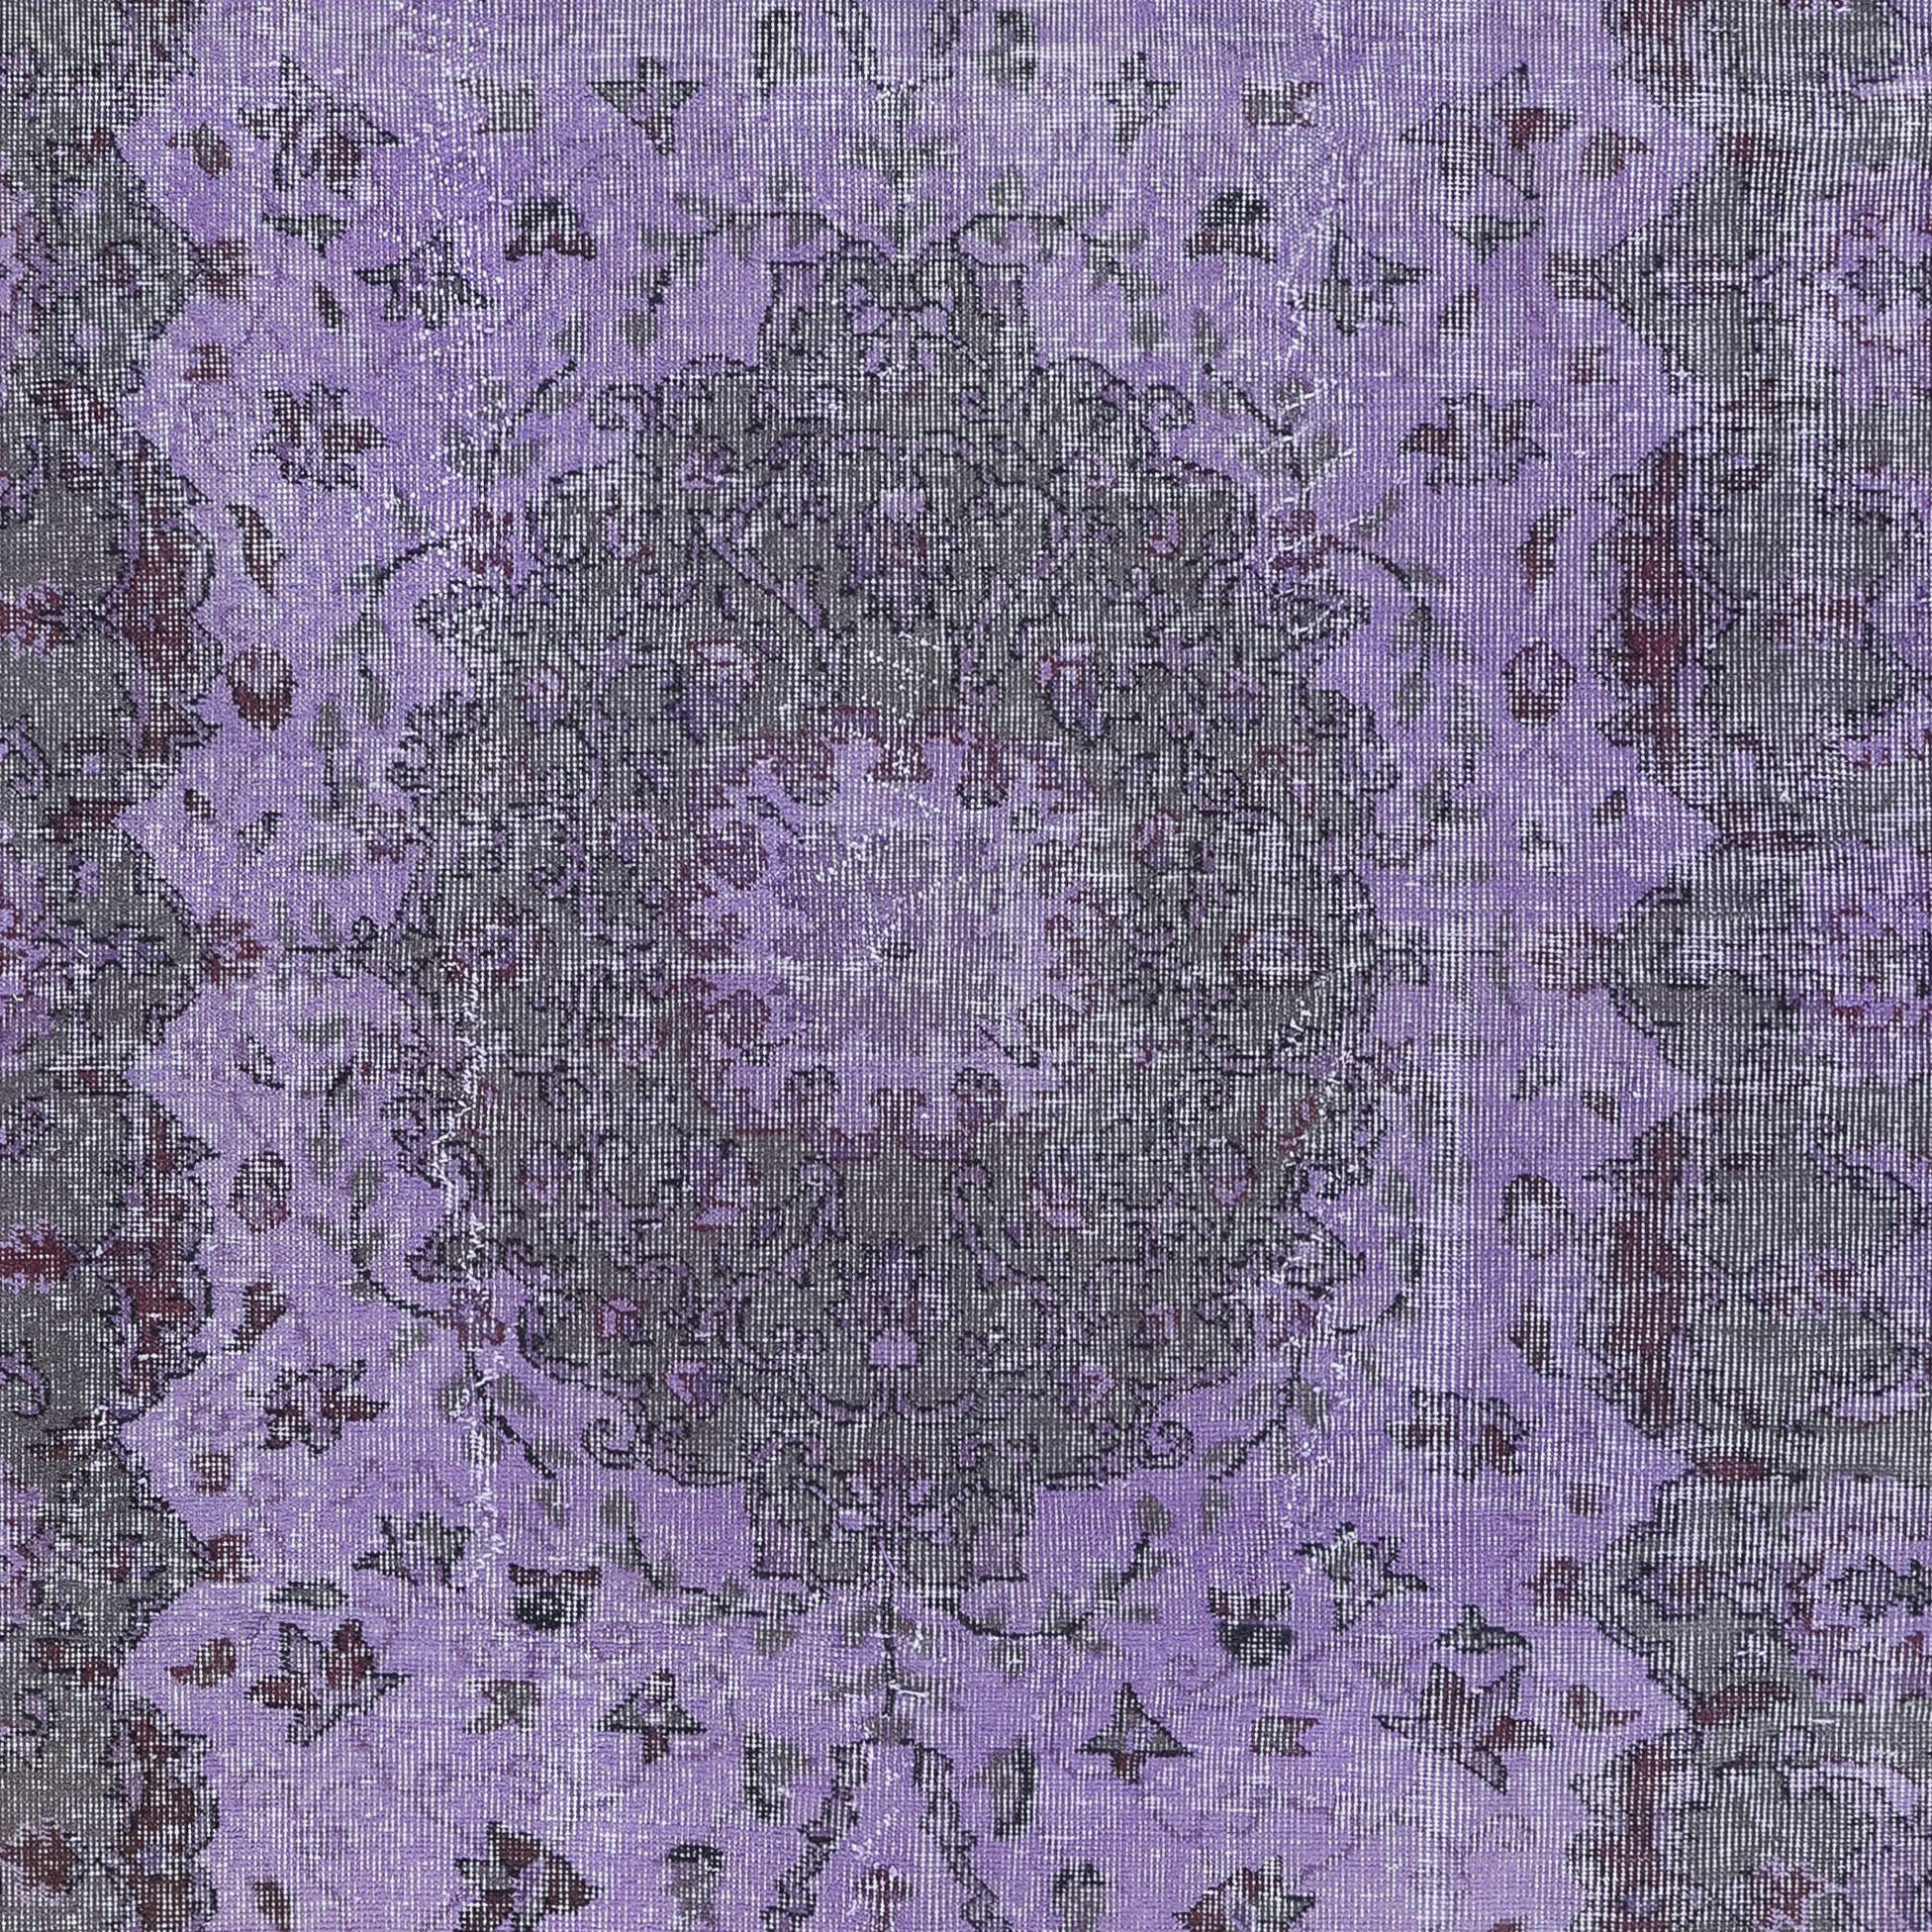 Turkish 5.3x8.8 Ft Modern Purple Area Rug, Handknotted and Handwoven in Turkey For Sale